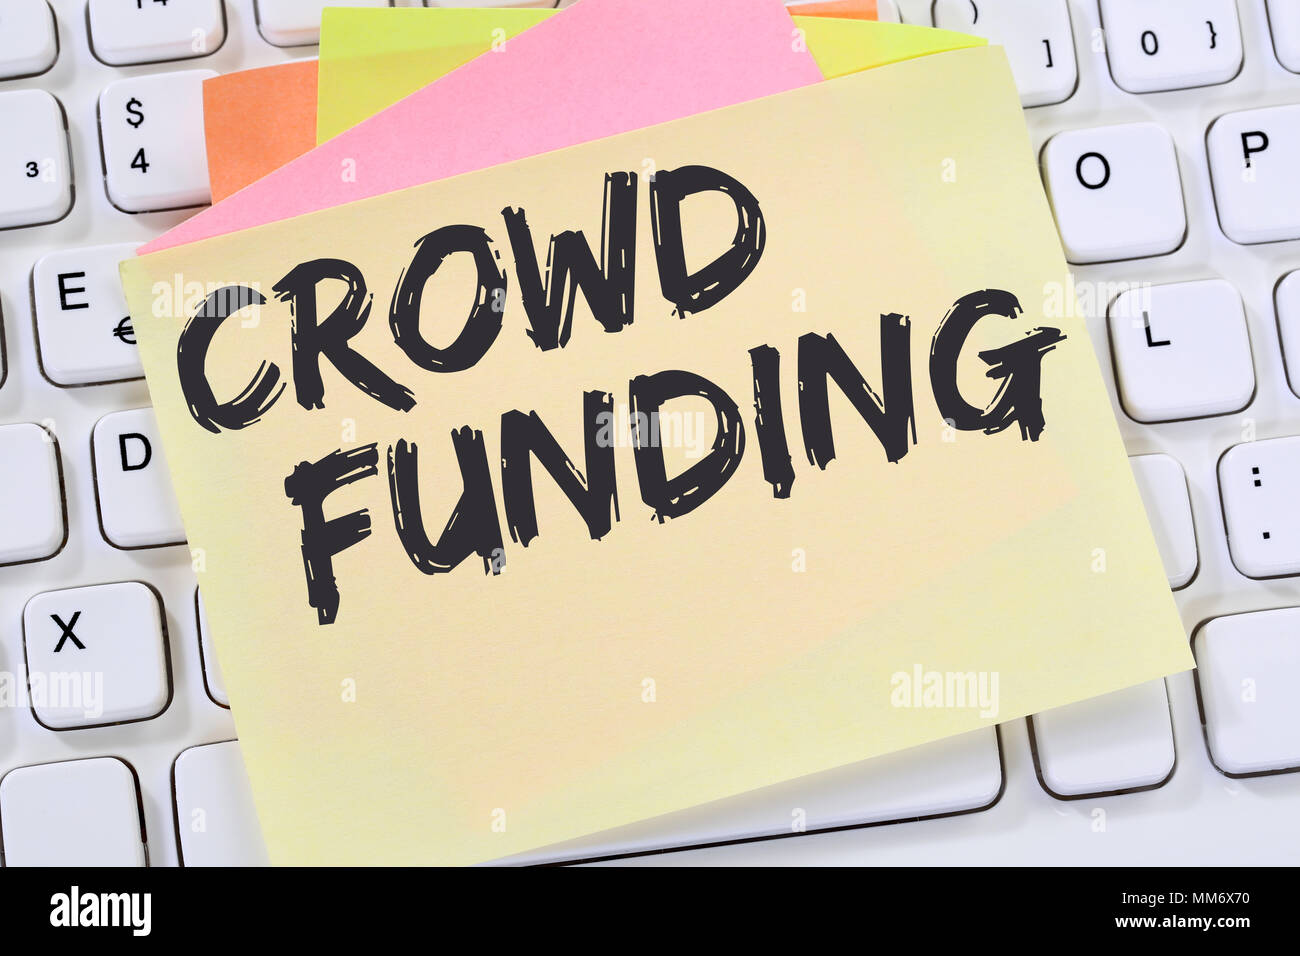 Crowd funding crowdfunding collecting money online investment internet business concept note paper desk computer keyboard Stock Photo